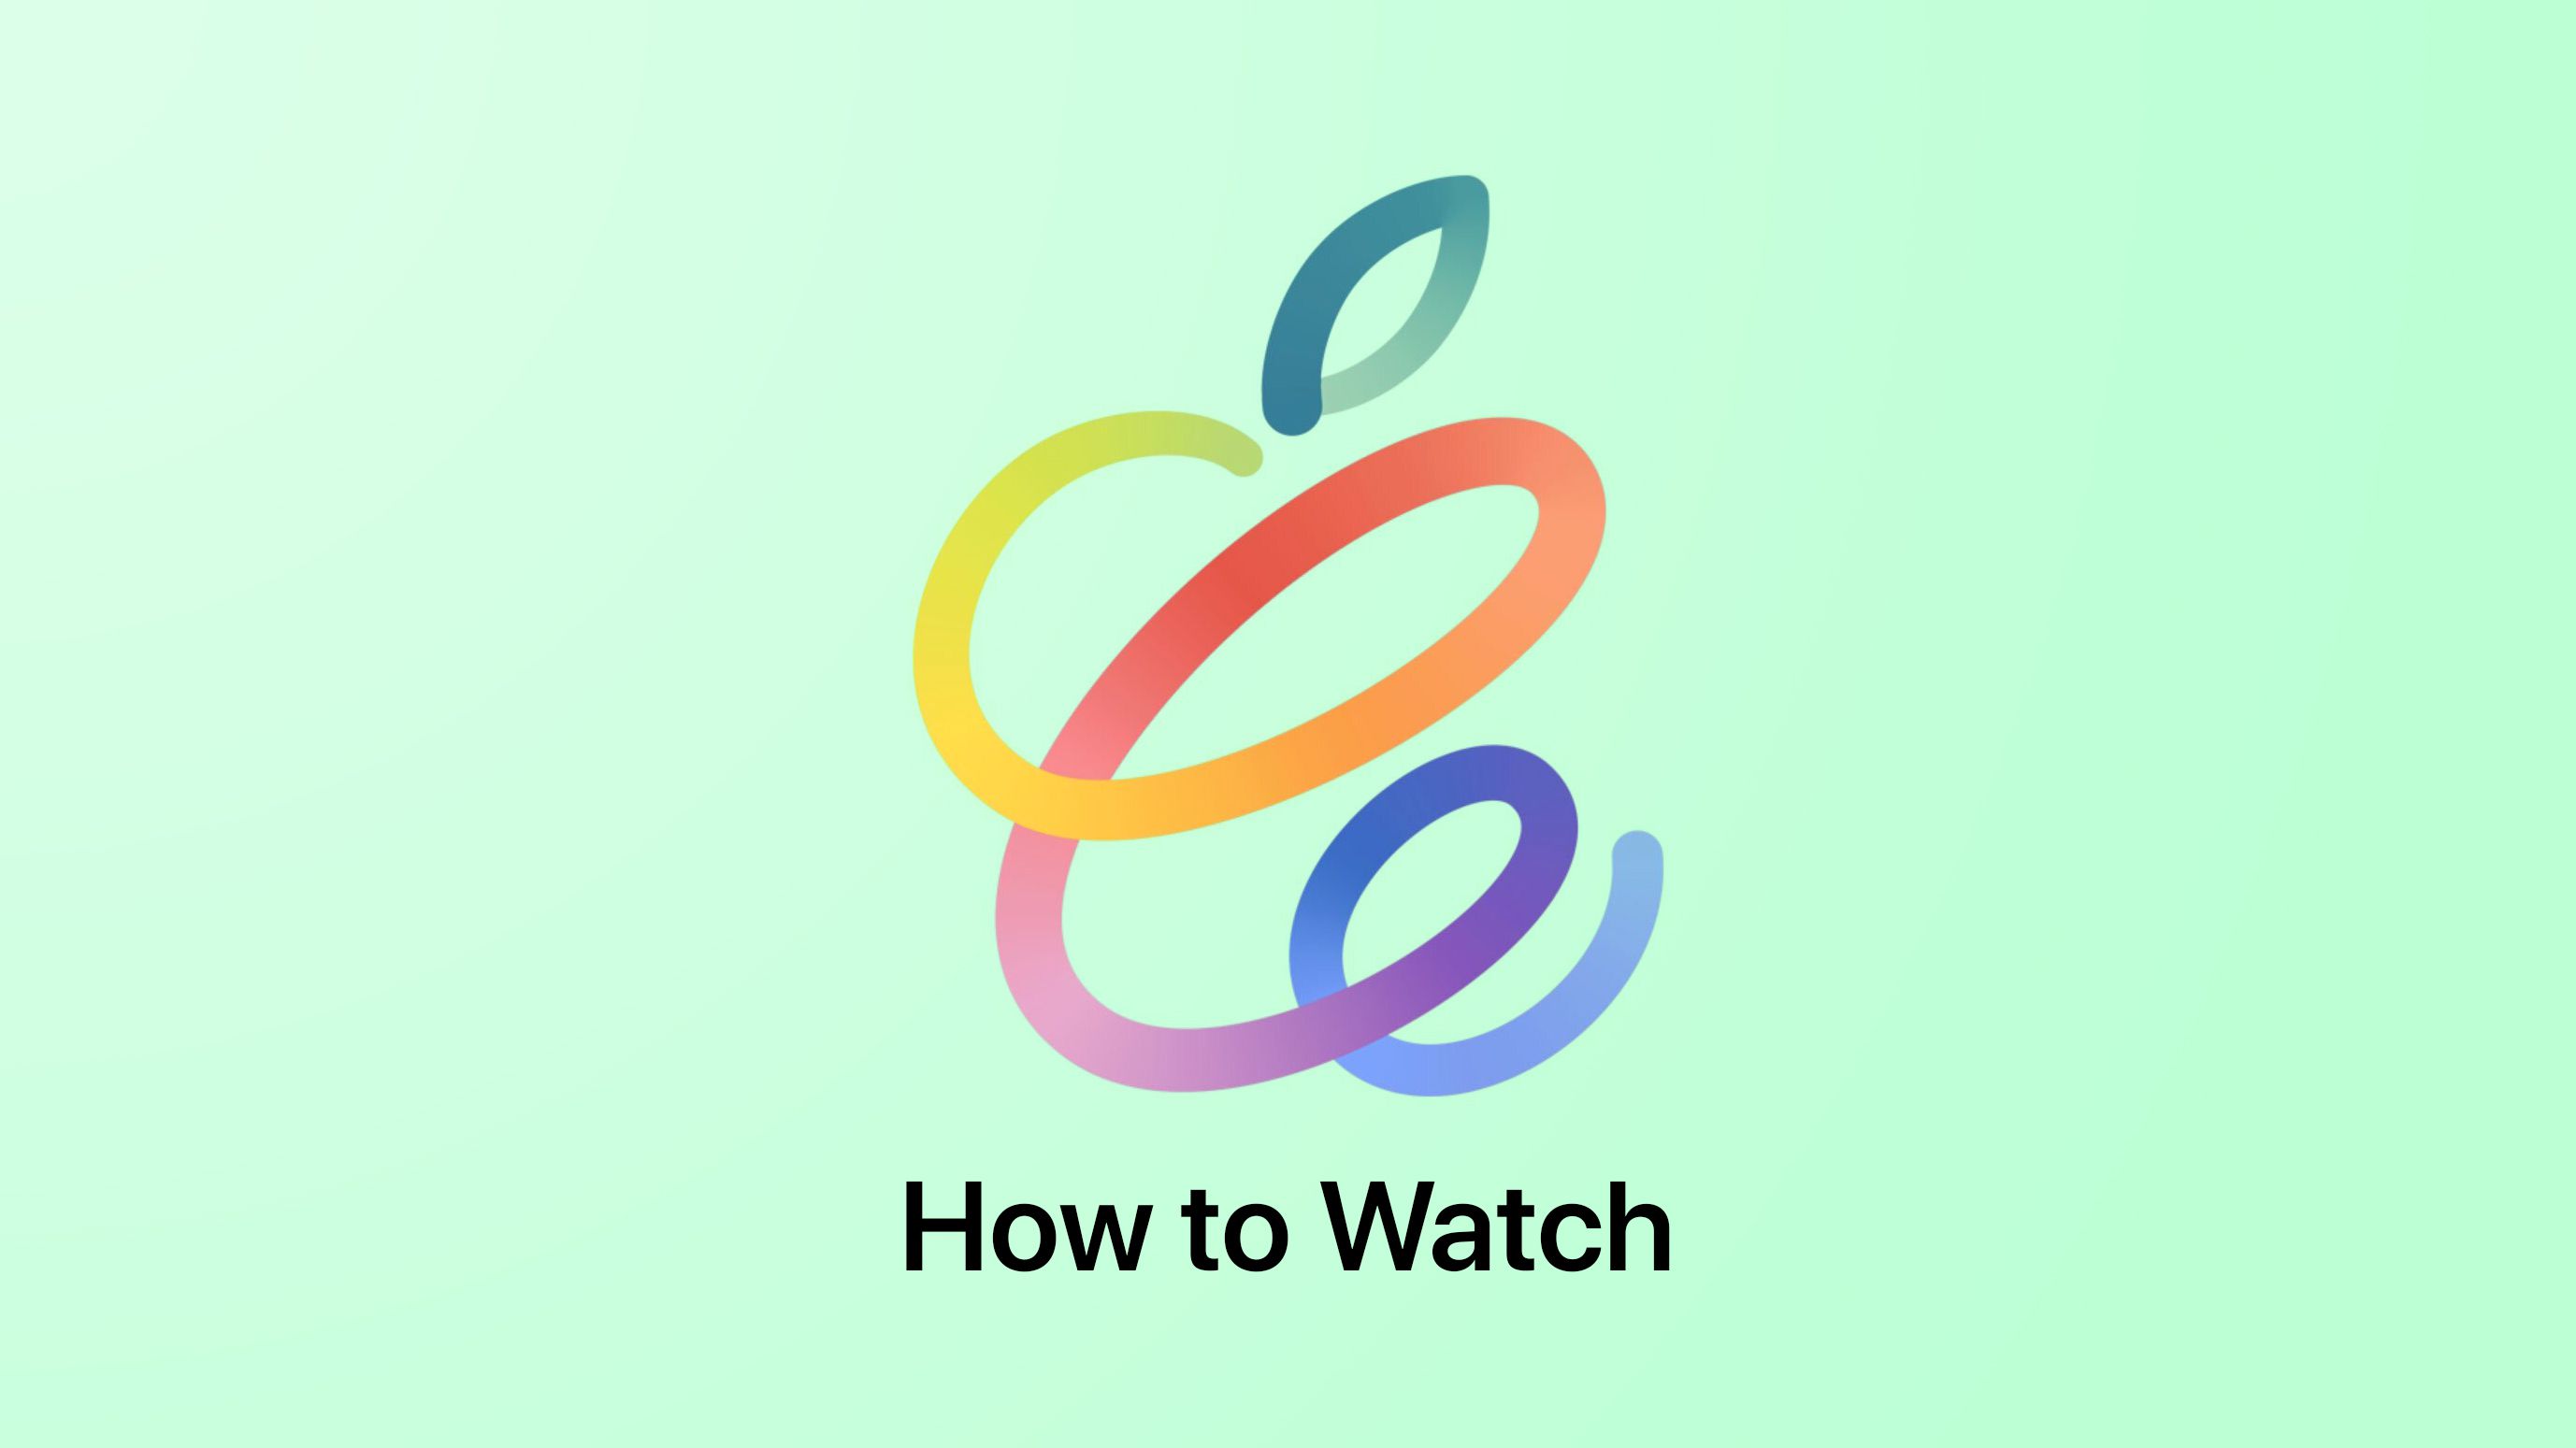 How to watch the "Spring Loaded" Apple event on April 20, 2021 ExBulletin